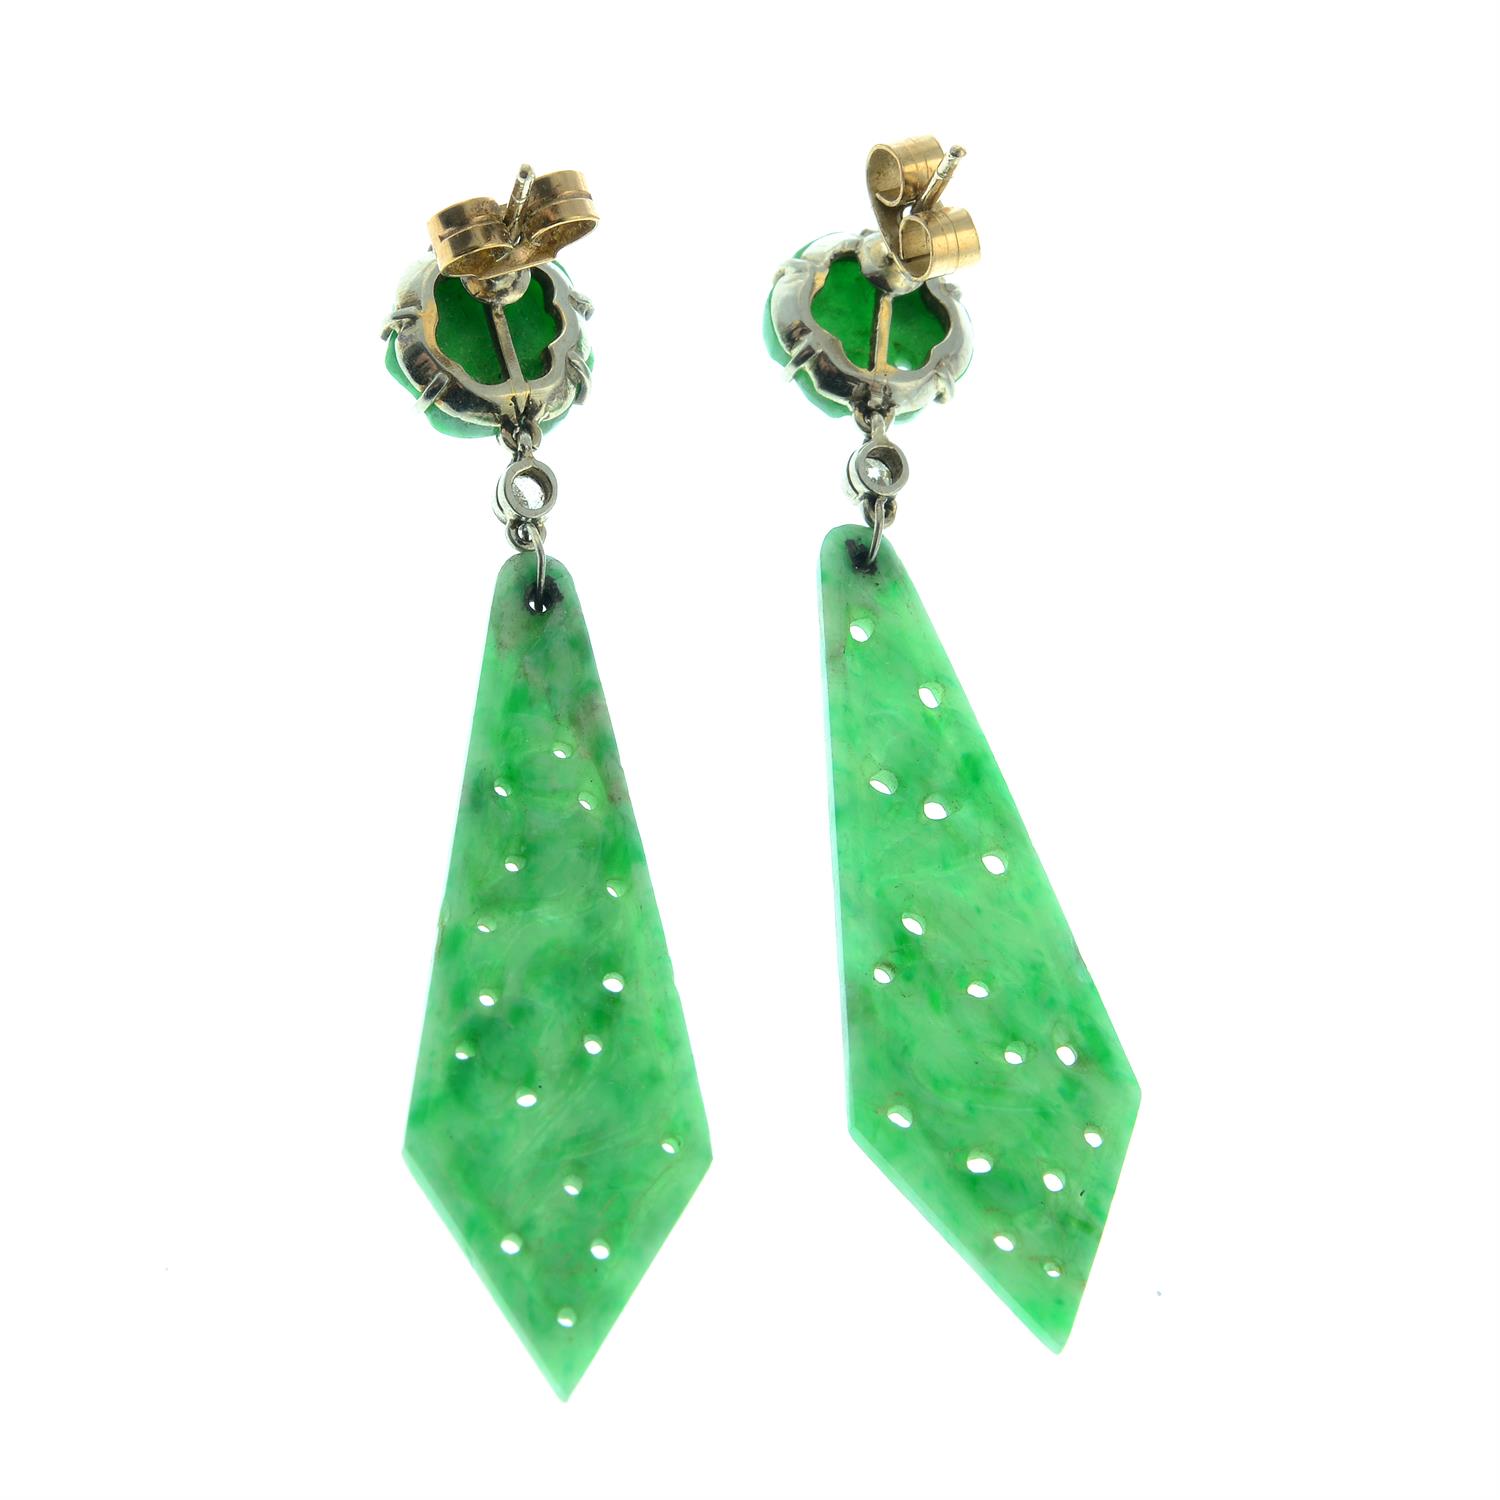 A pair of early 20th century 15ct gold carved and pierced jade earrings, with single-cut diamond - Image 3 of 3